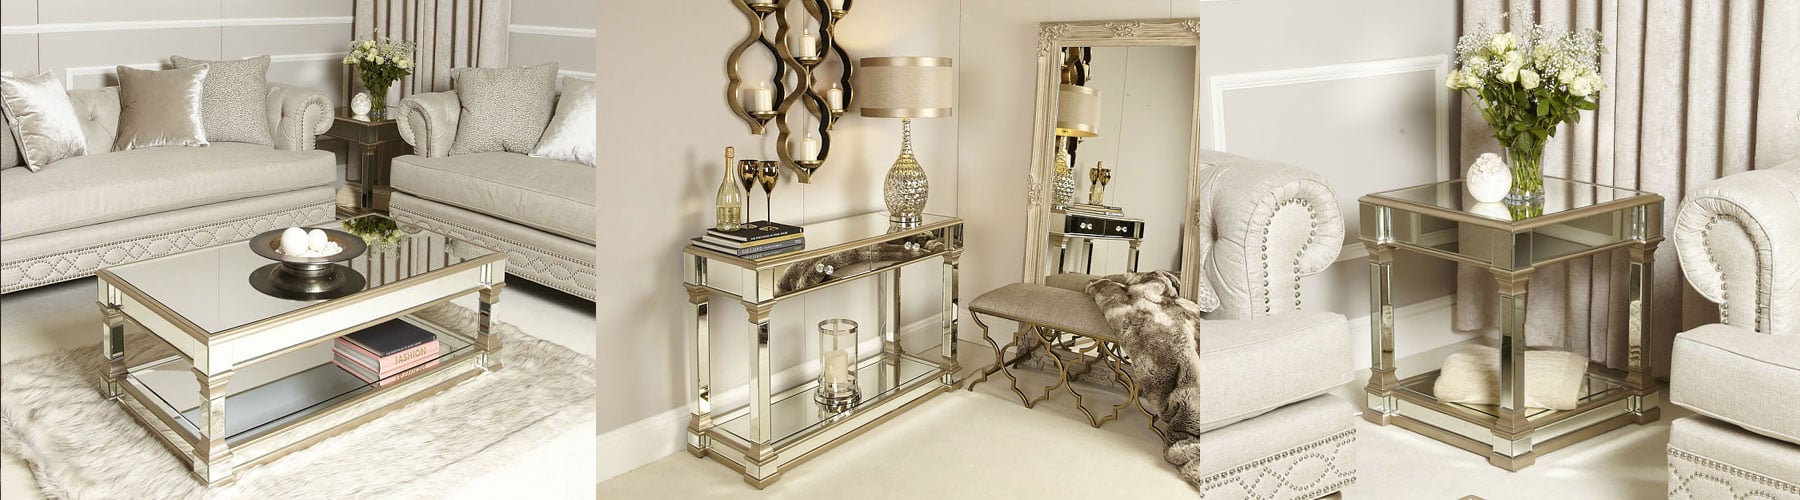 Georgia Mirrored 4 Drawer Console Table